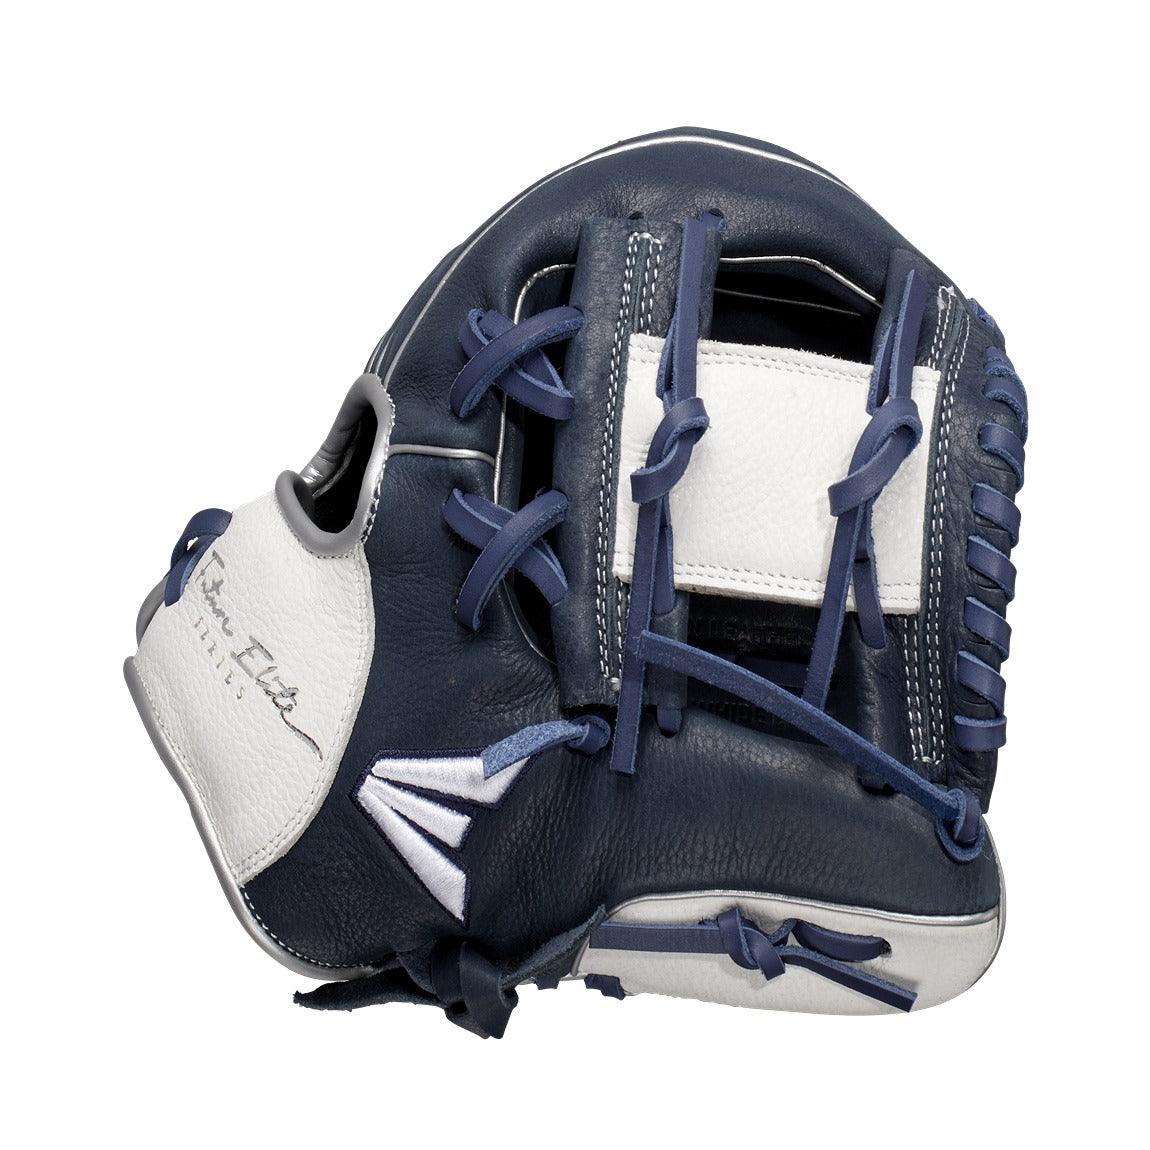 Future Elite 11" Baseball Glove - Youth - Sports Excellence